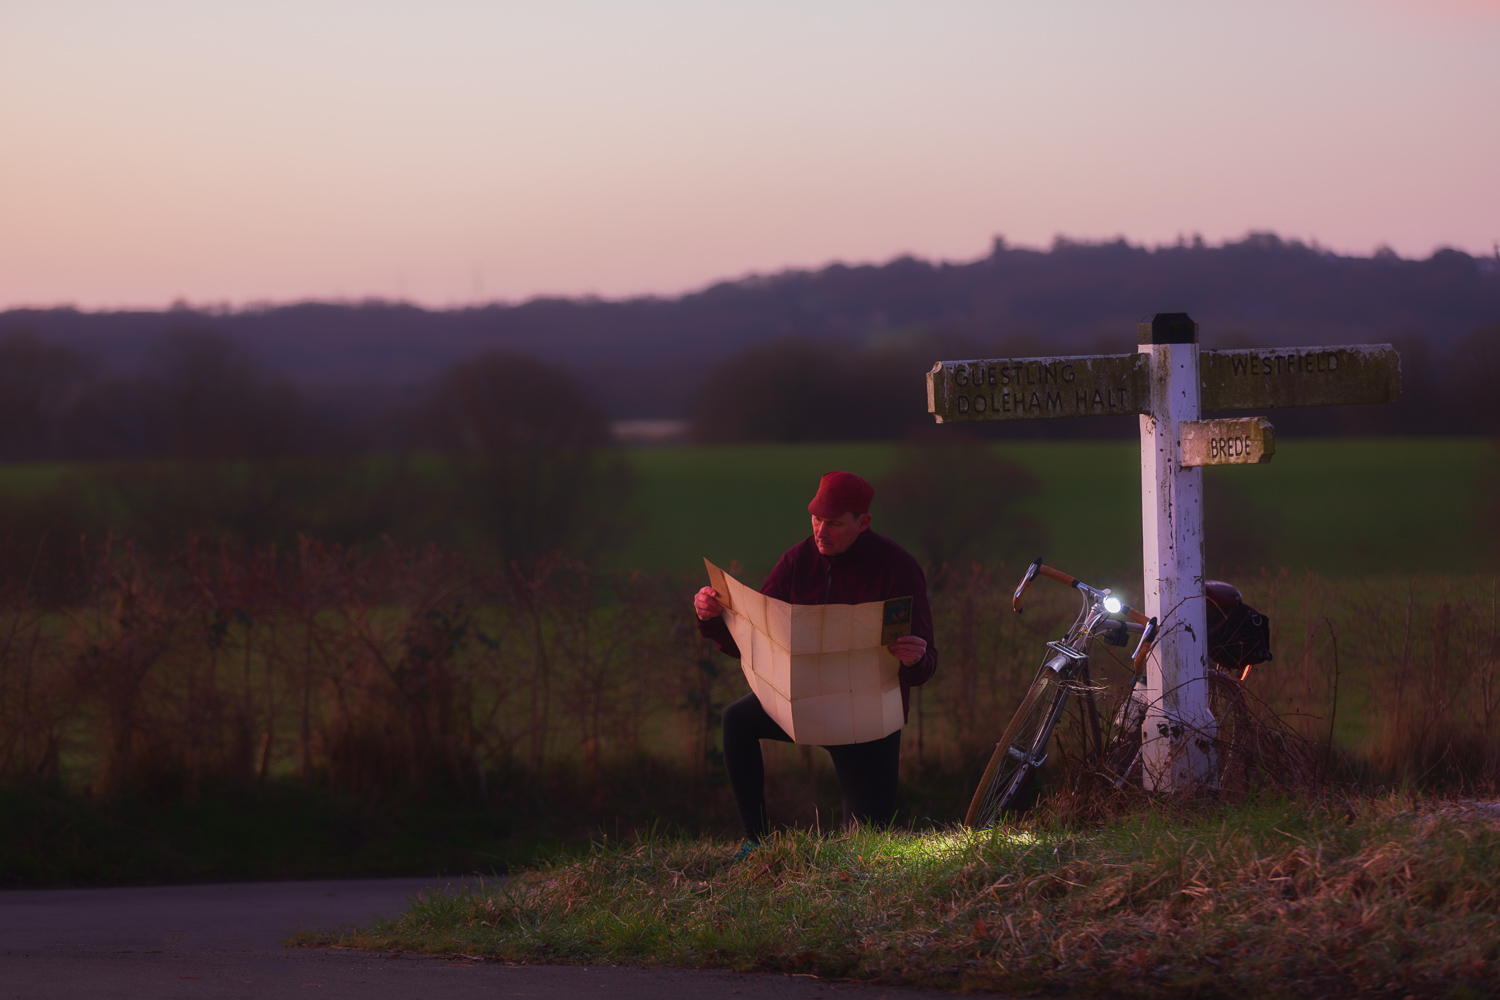 Cyclist consulting a map by lamplight at a lonely crossroads at dusk